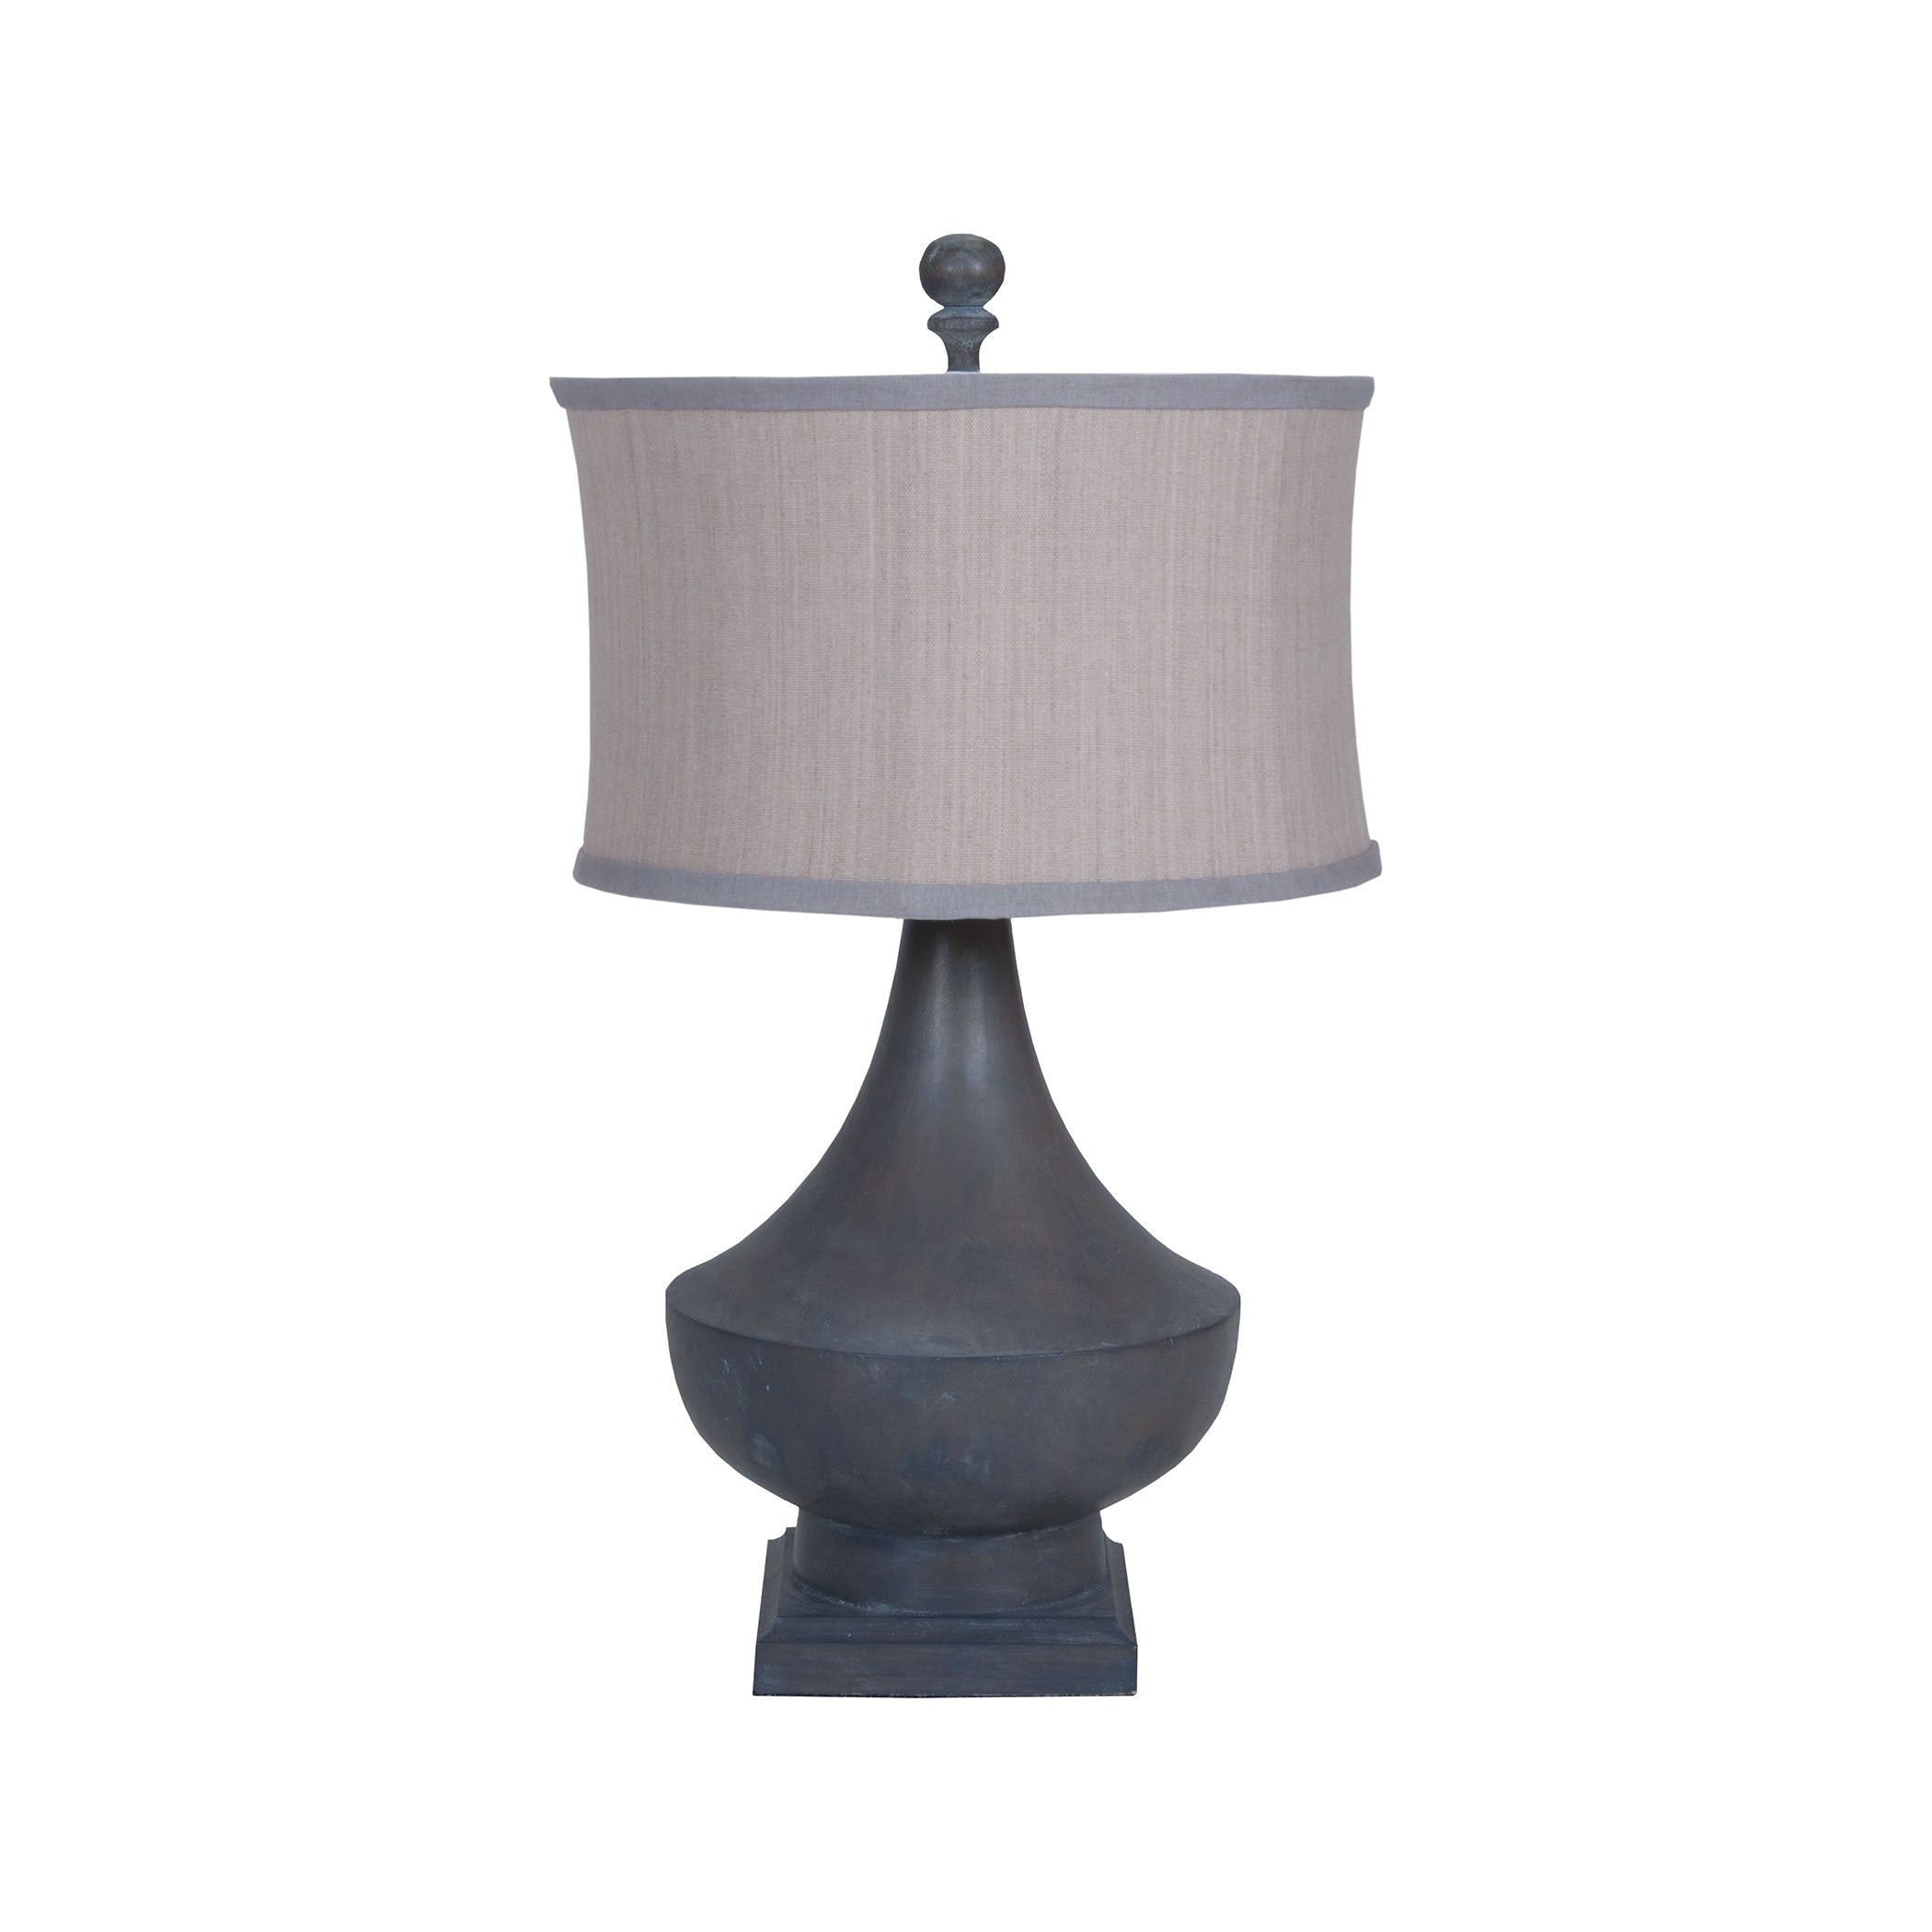 Guildmaster Gui-3516046 Vintage Collection Heritage Grey Stain Finish Table Lamp